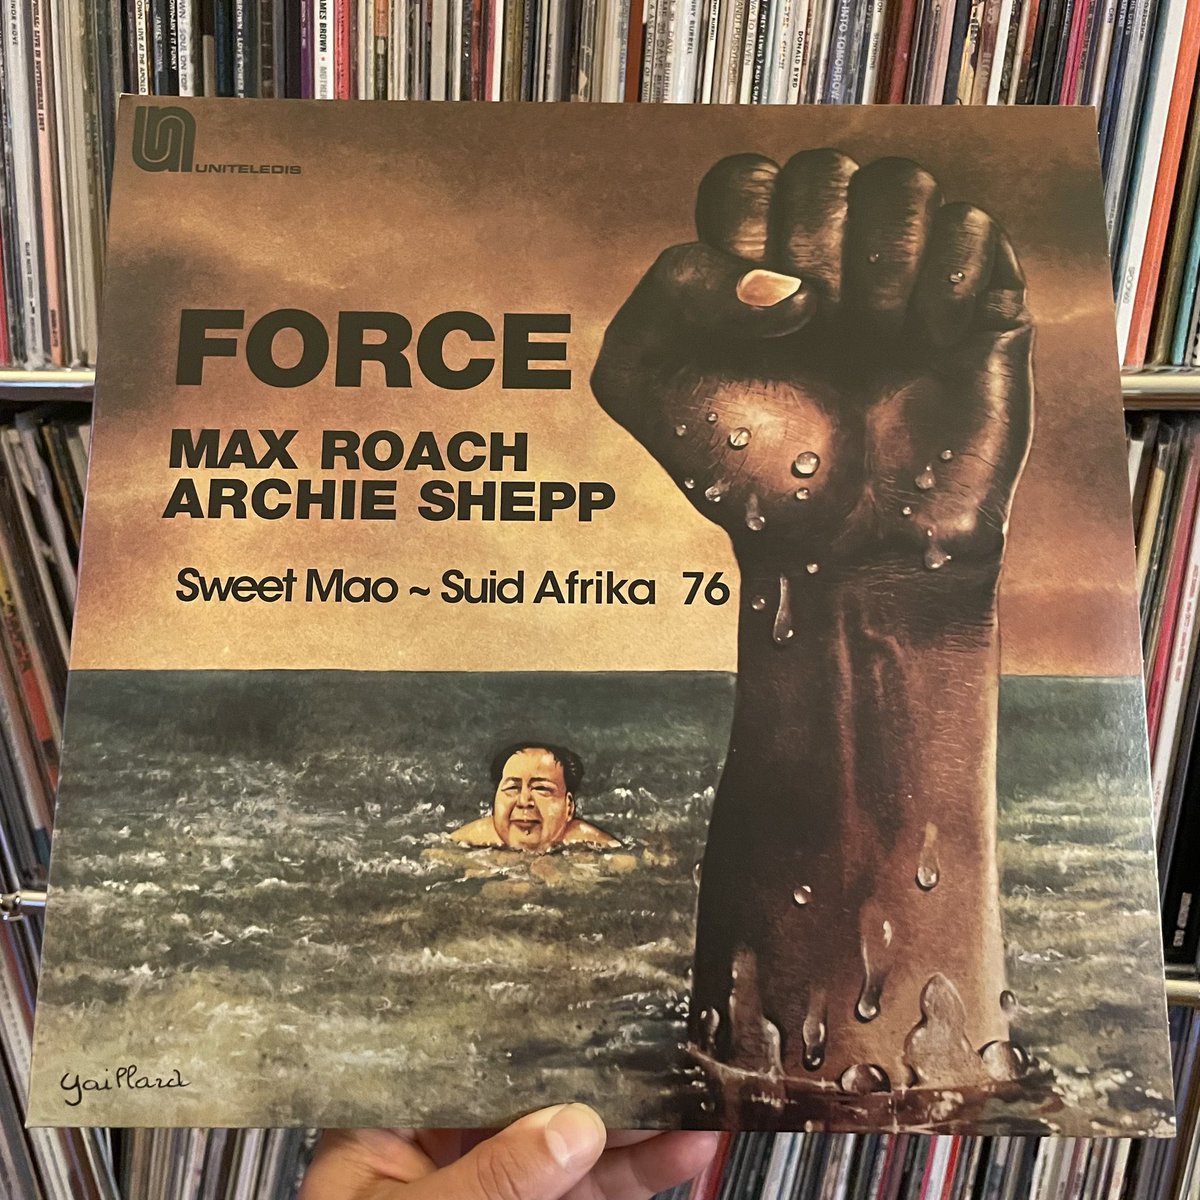 #NowPlaying Max Roach & Archie Shepp - FORCE (LMLR, 2023).

Initially released in 1976 on the French Uniteledis label, this edition is the 2023 Record Store Day release.

I'm listening to only one record tonight ; might as well choose powerful music 🔥

#MaxRoach #ArchieShepp